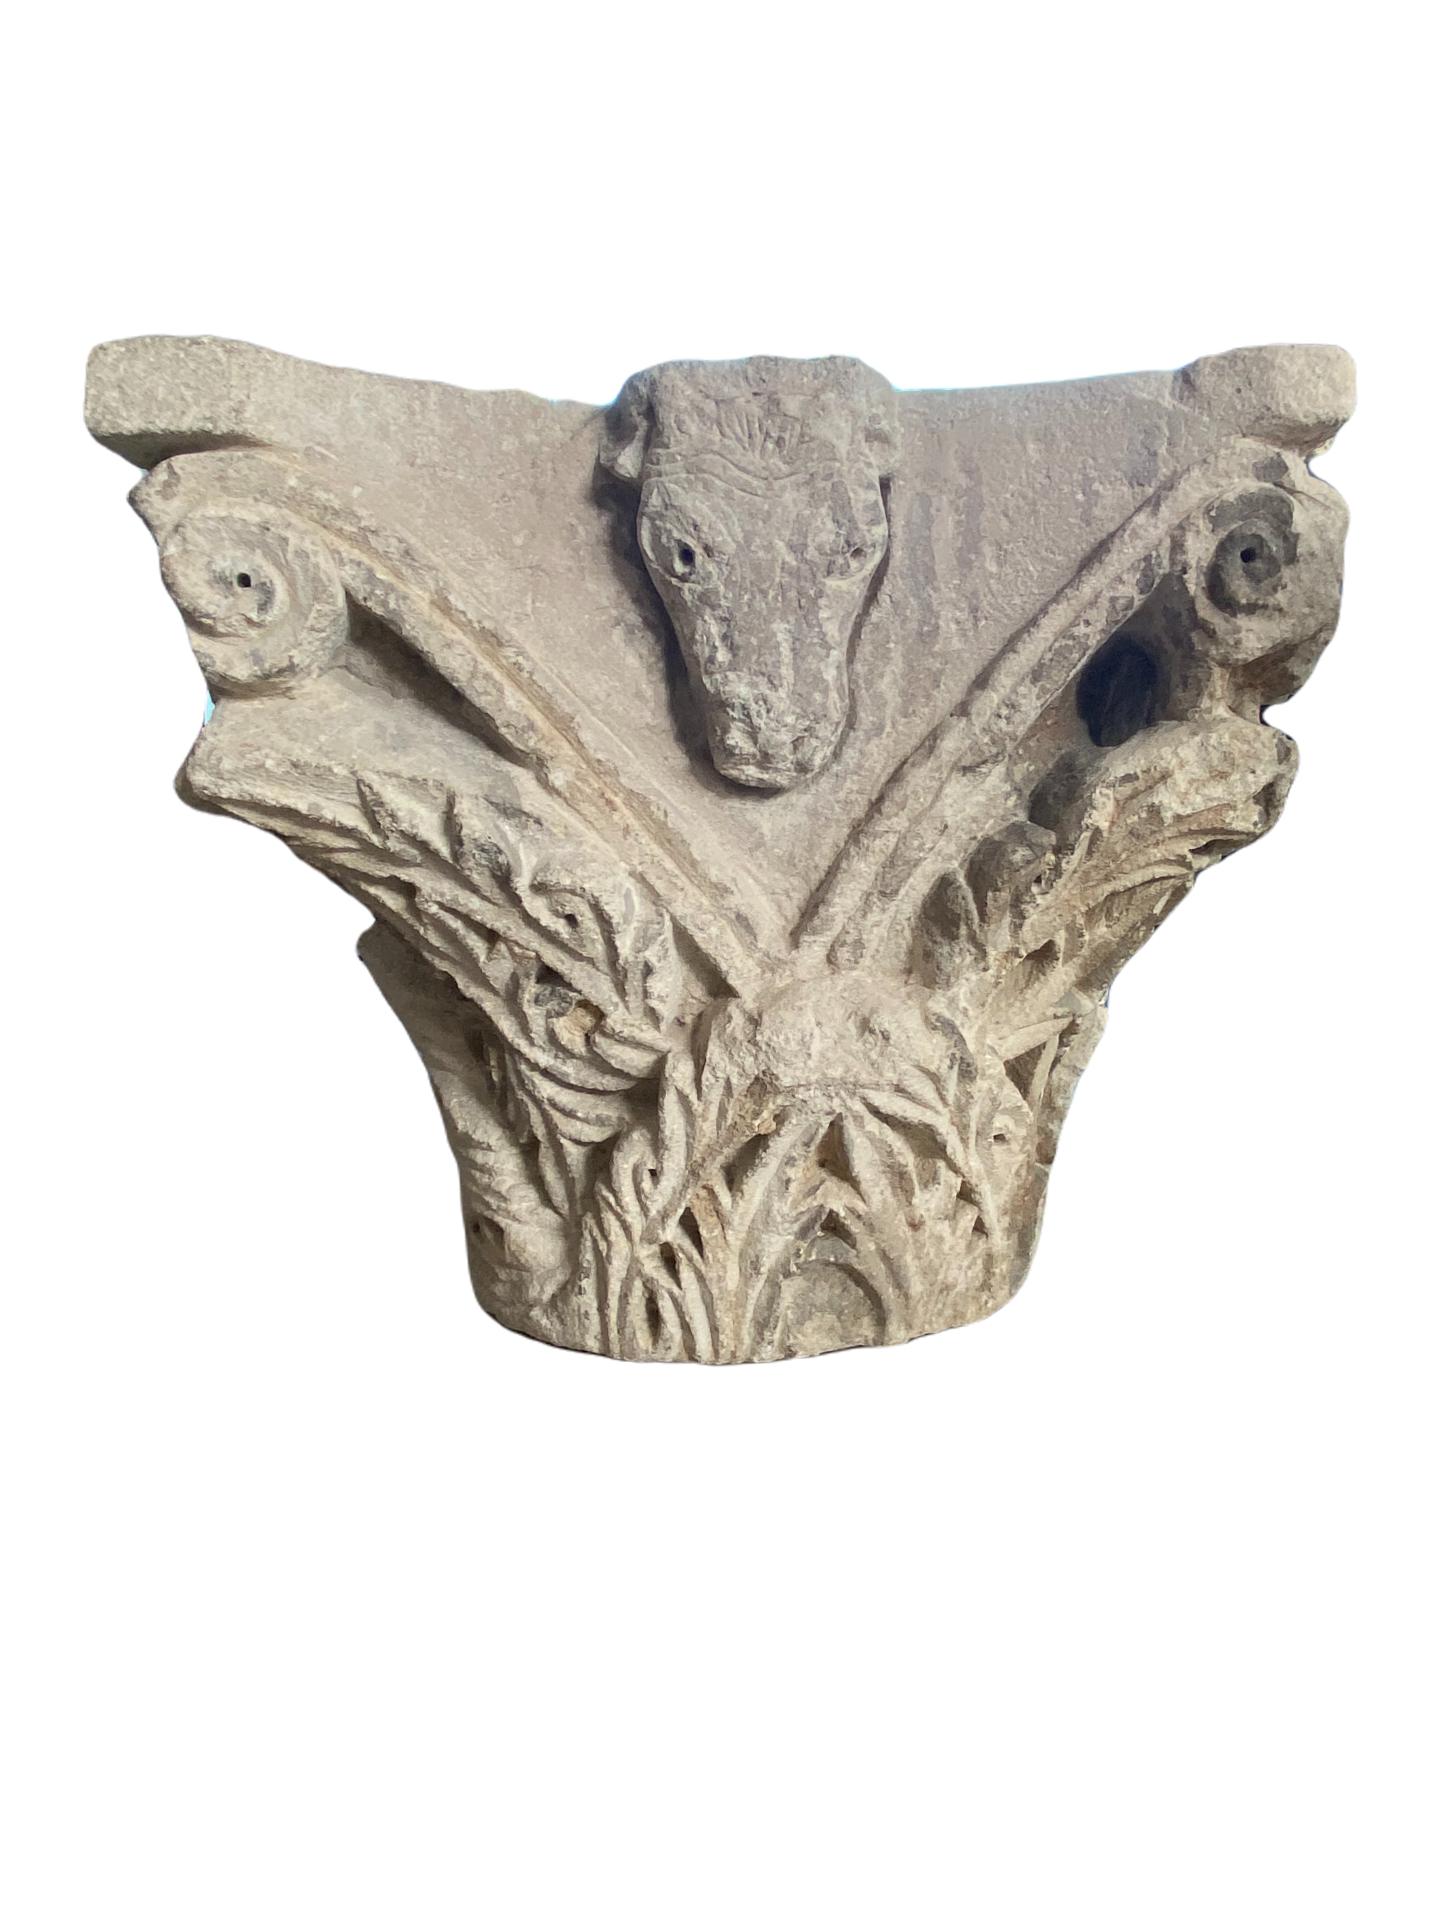 Important Romanesque capital - Sculpture by Unknown